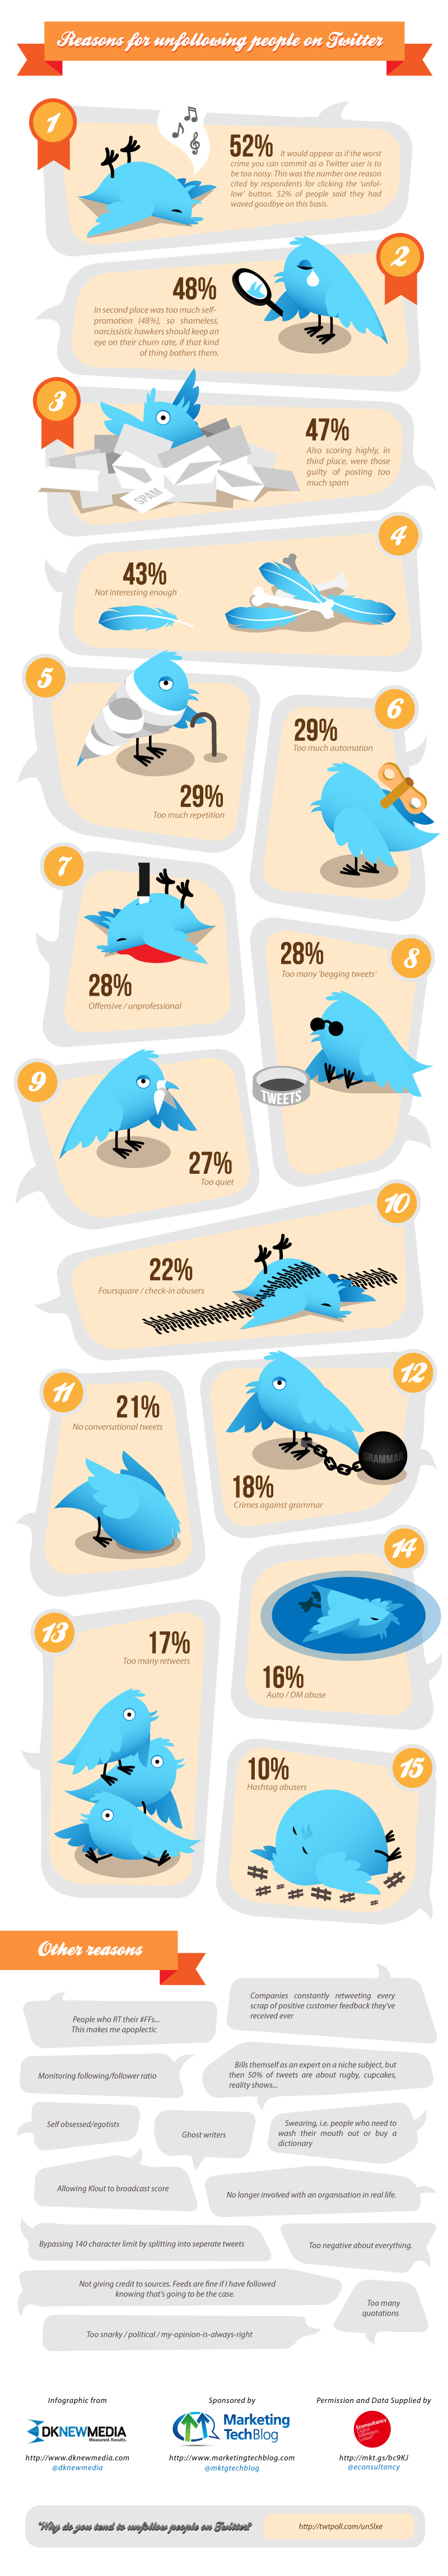 Twitter infographic